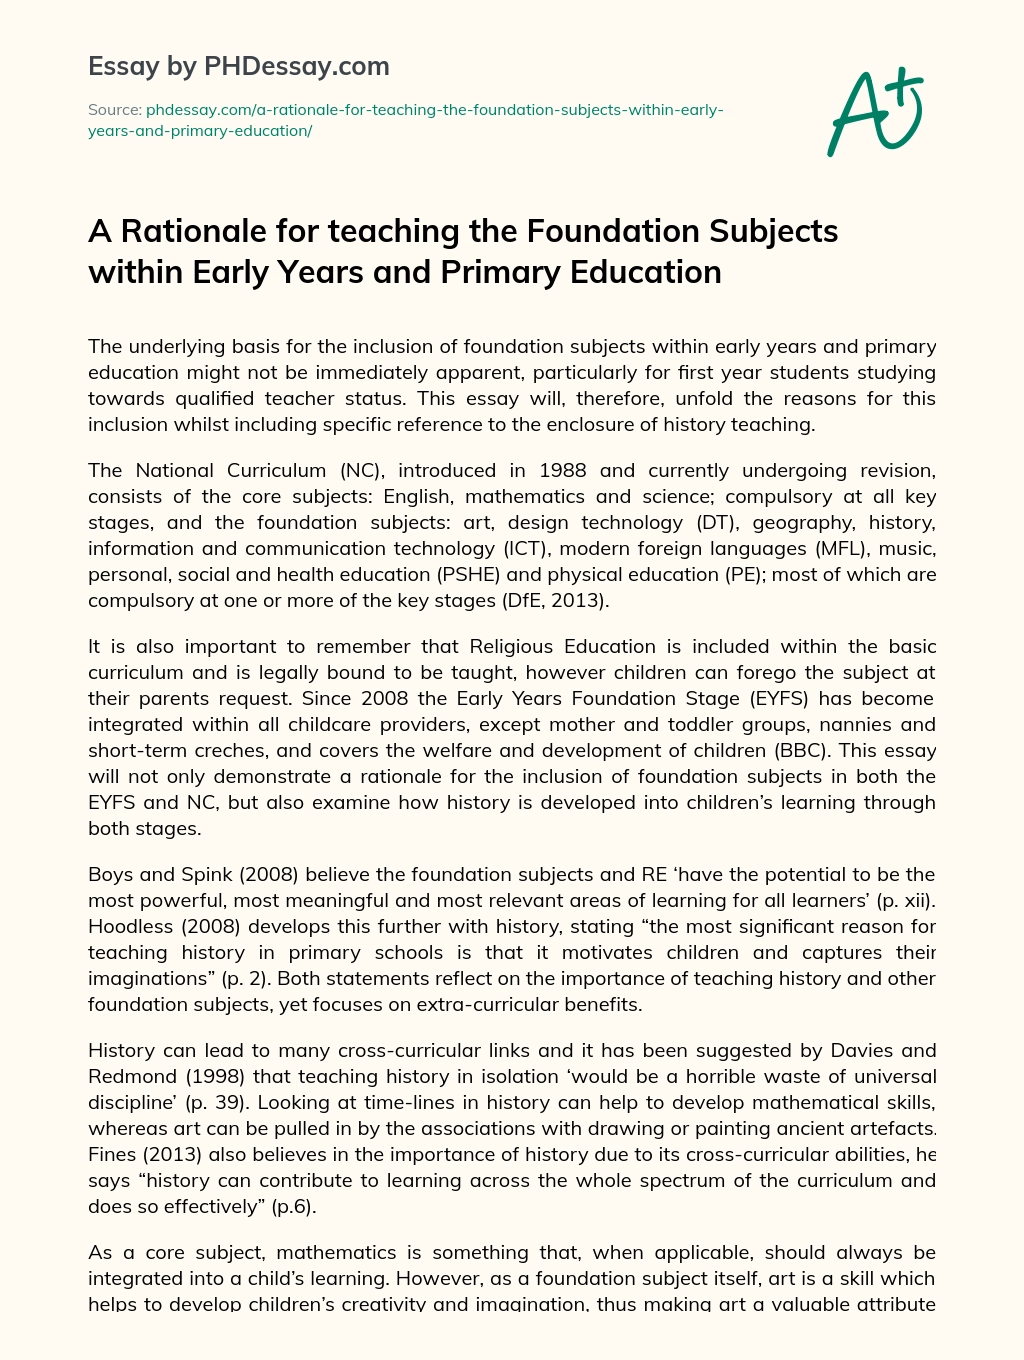 A Rationale for teaching the Foundation Subjects within Early Years and Primary Education essay